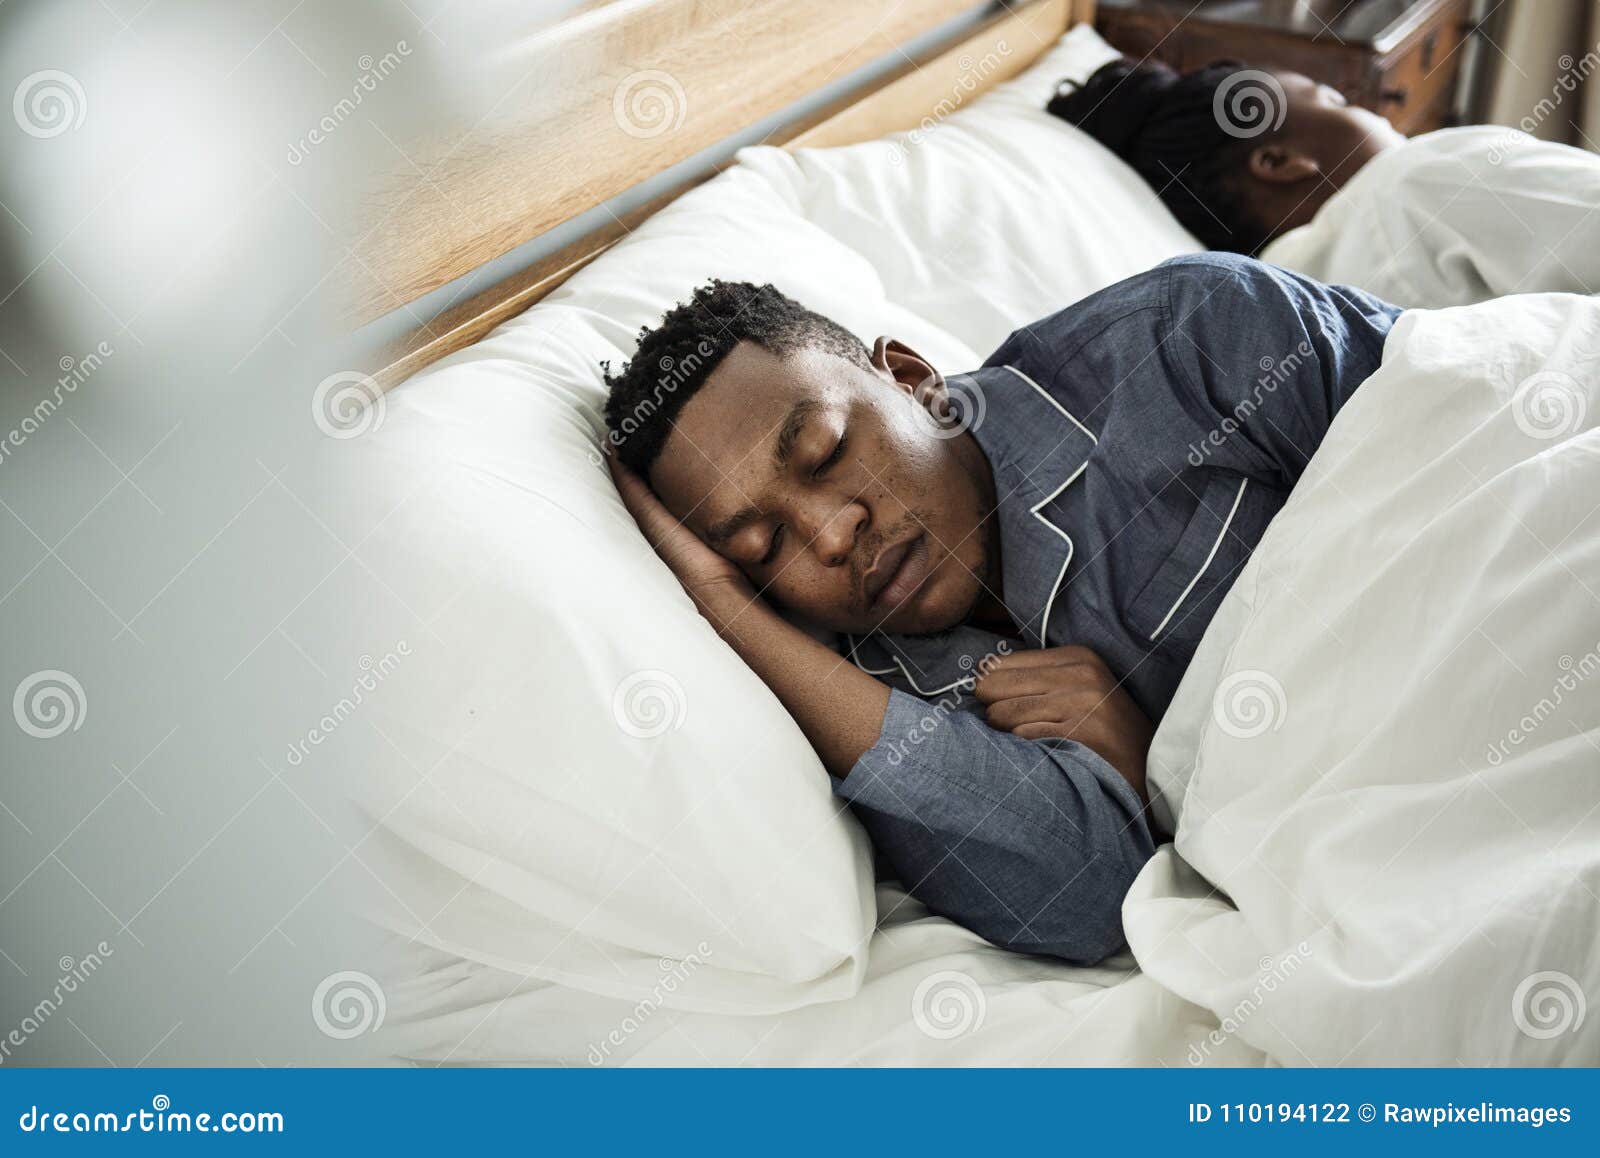 couple sleeping soundly in bed